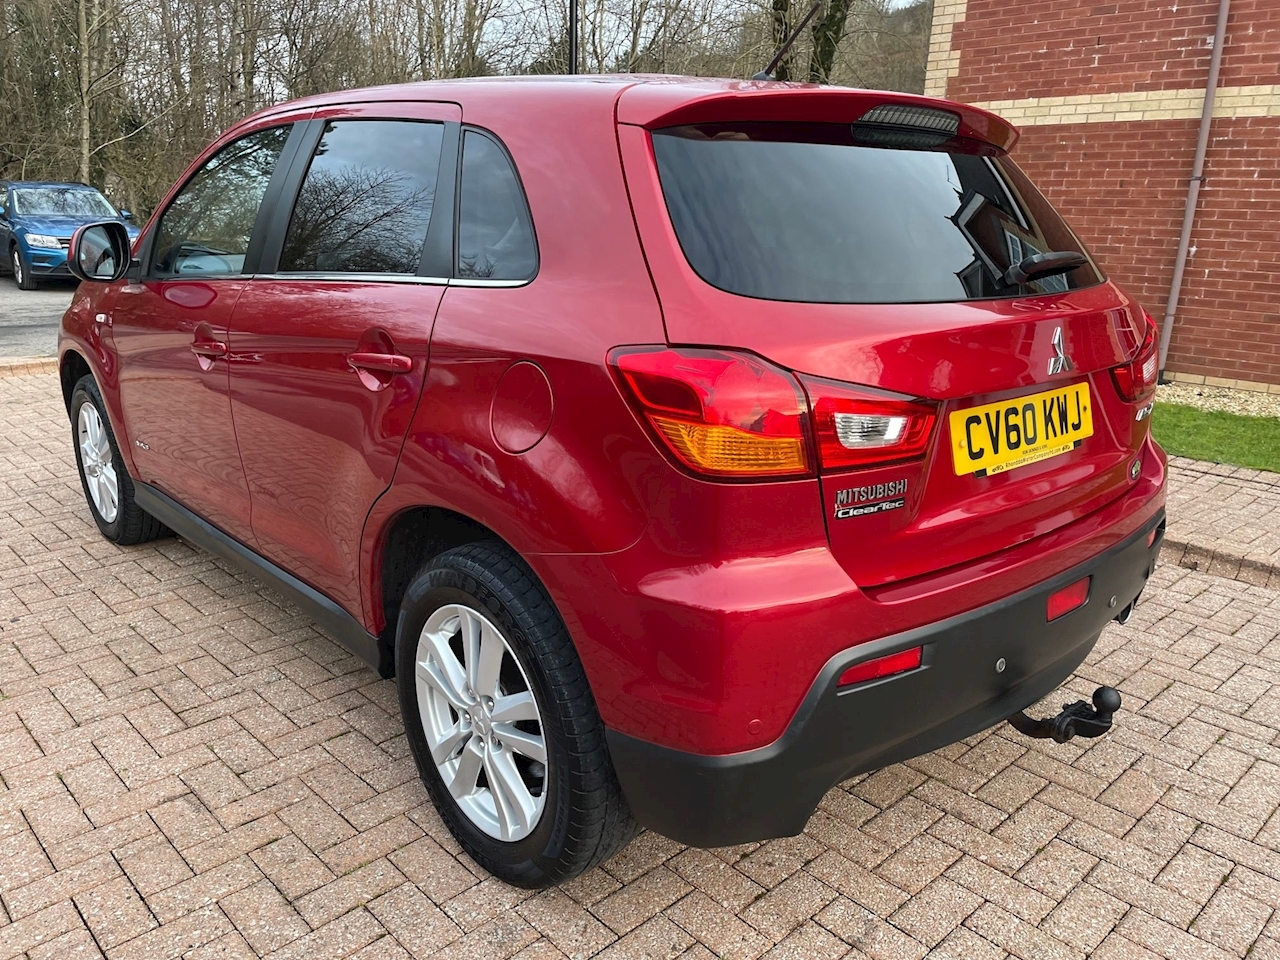 1.8D ClearTec 3 SUV 5dr Diesel Manual (145 g/km, 147 bhp)